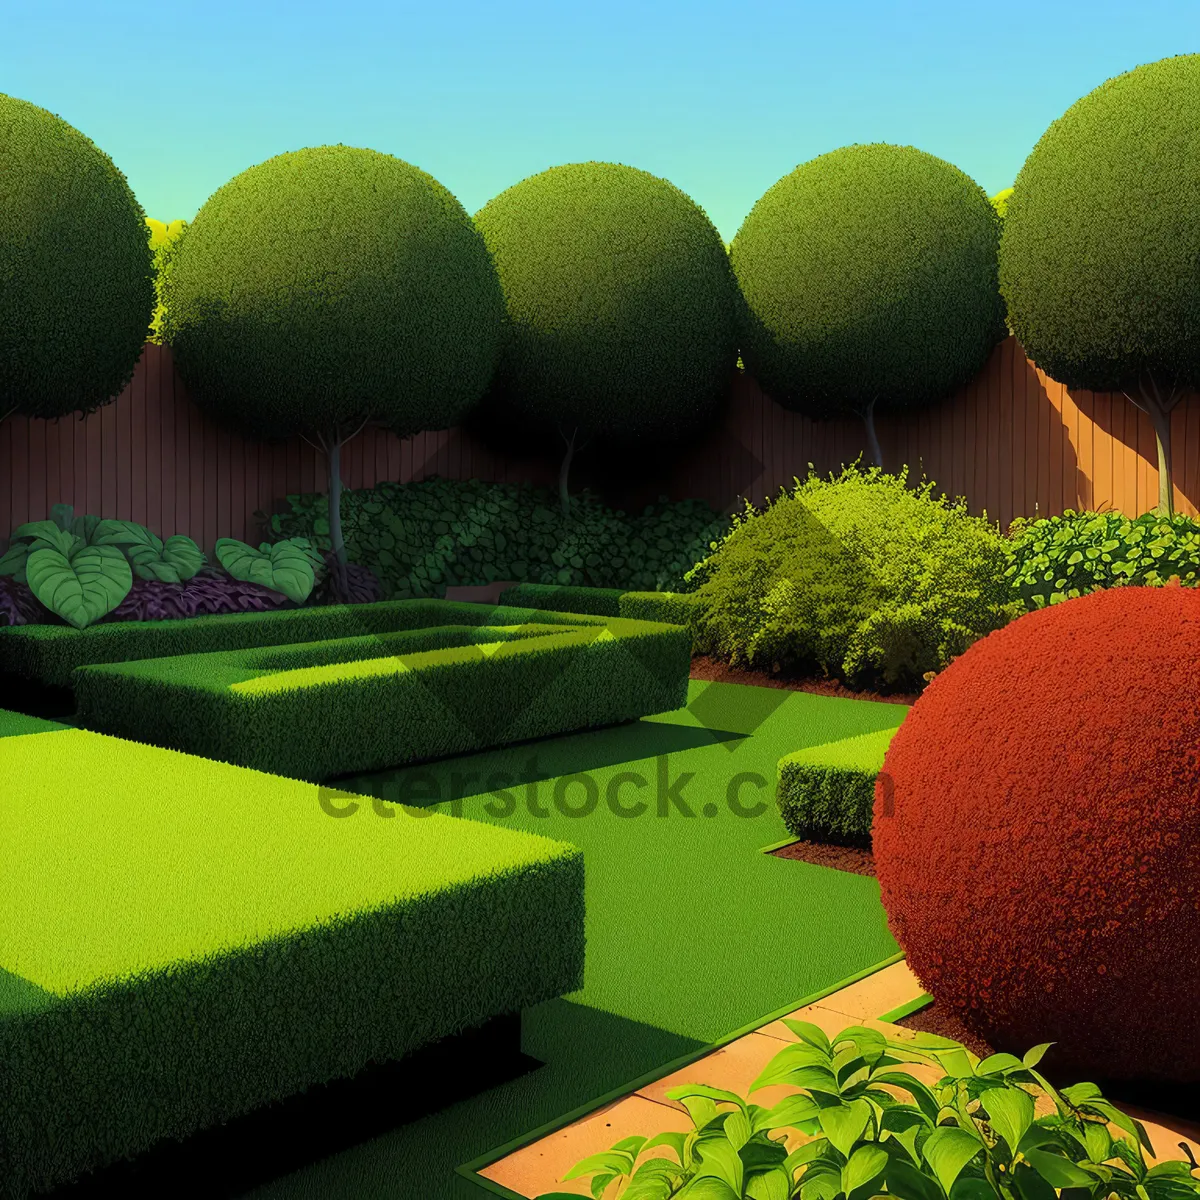 Picture of Fresh Fruit and Tennis Ball Game